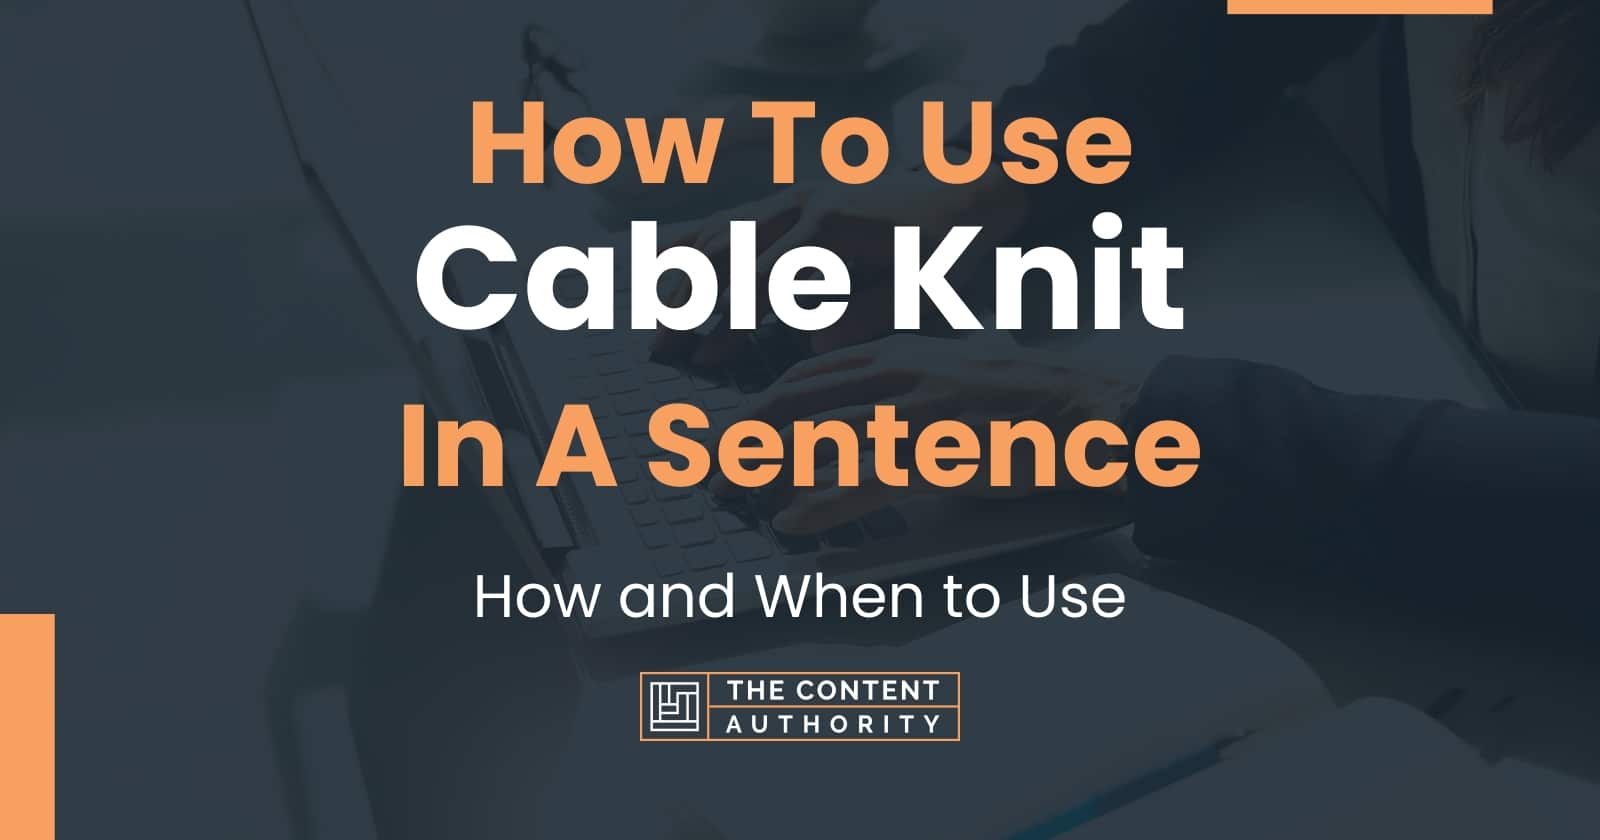 How To Use "Cable Knit" In A Sentence How and When to Use